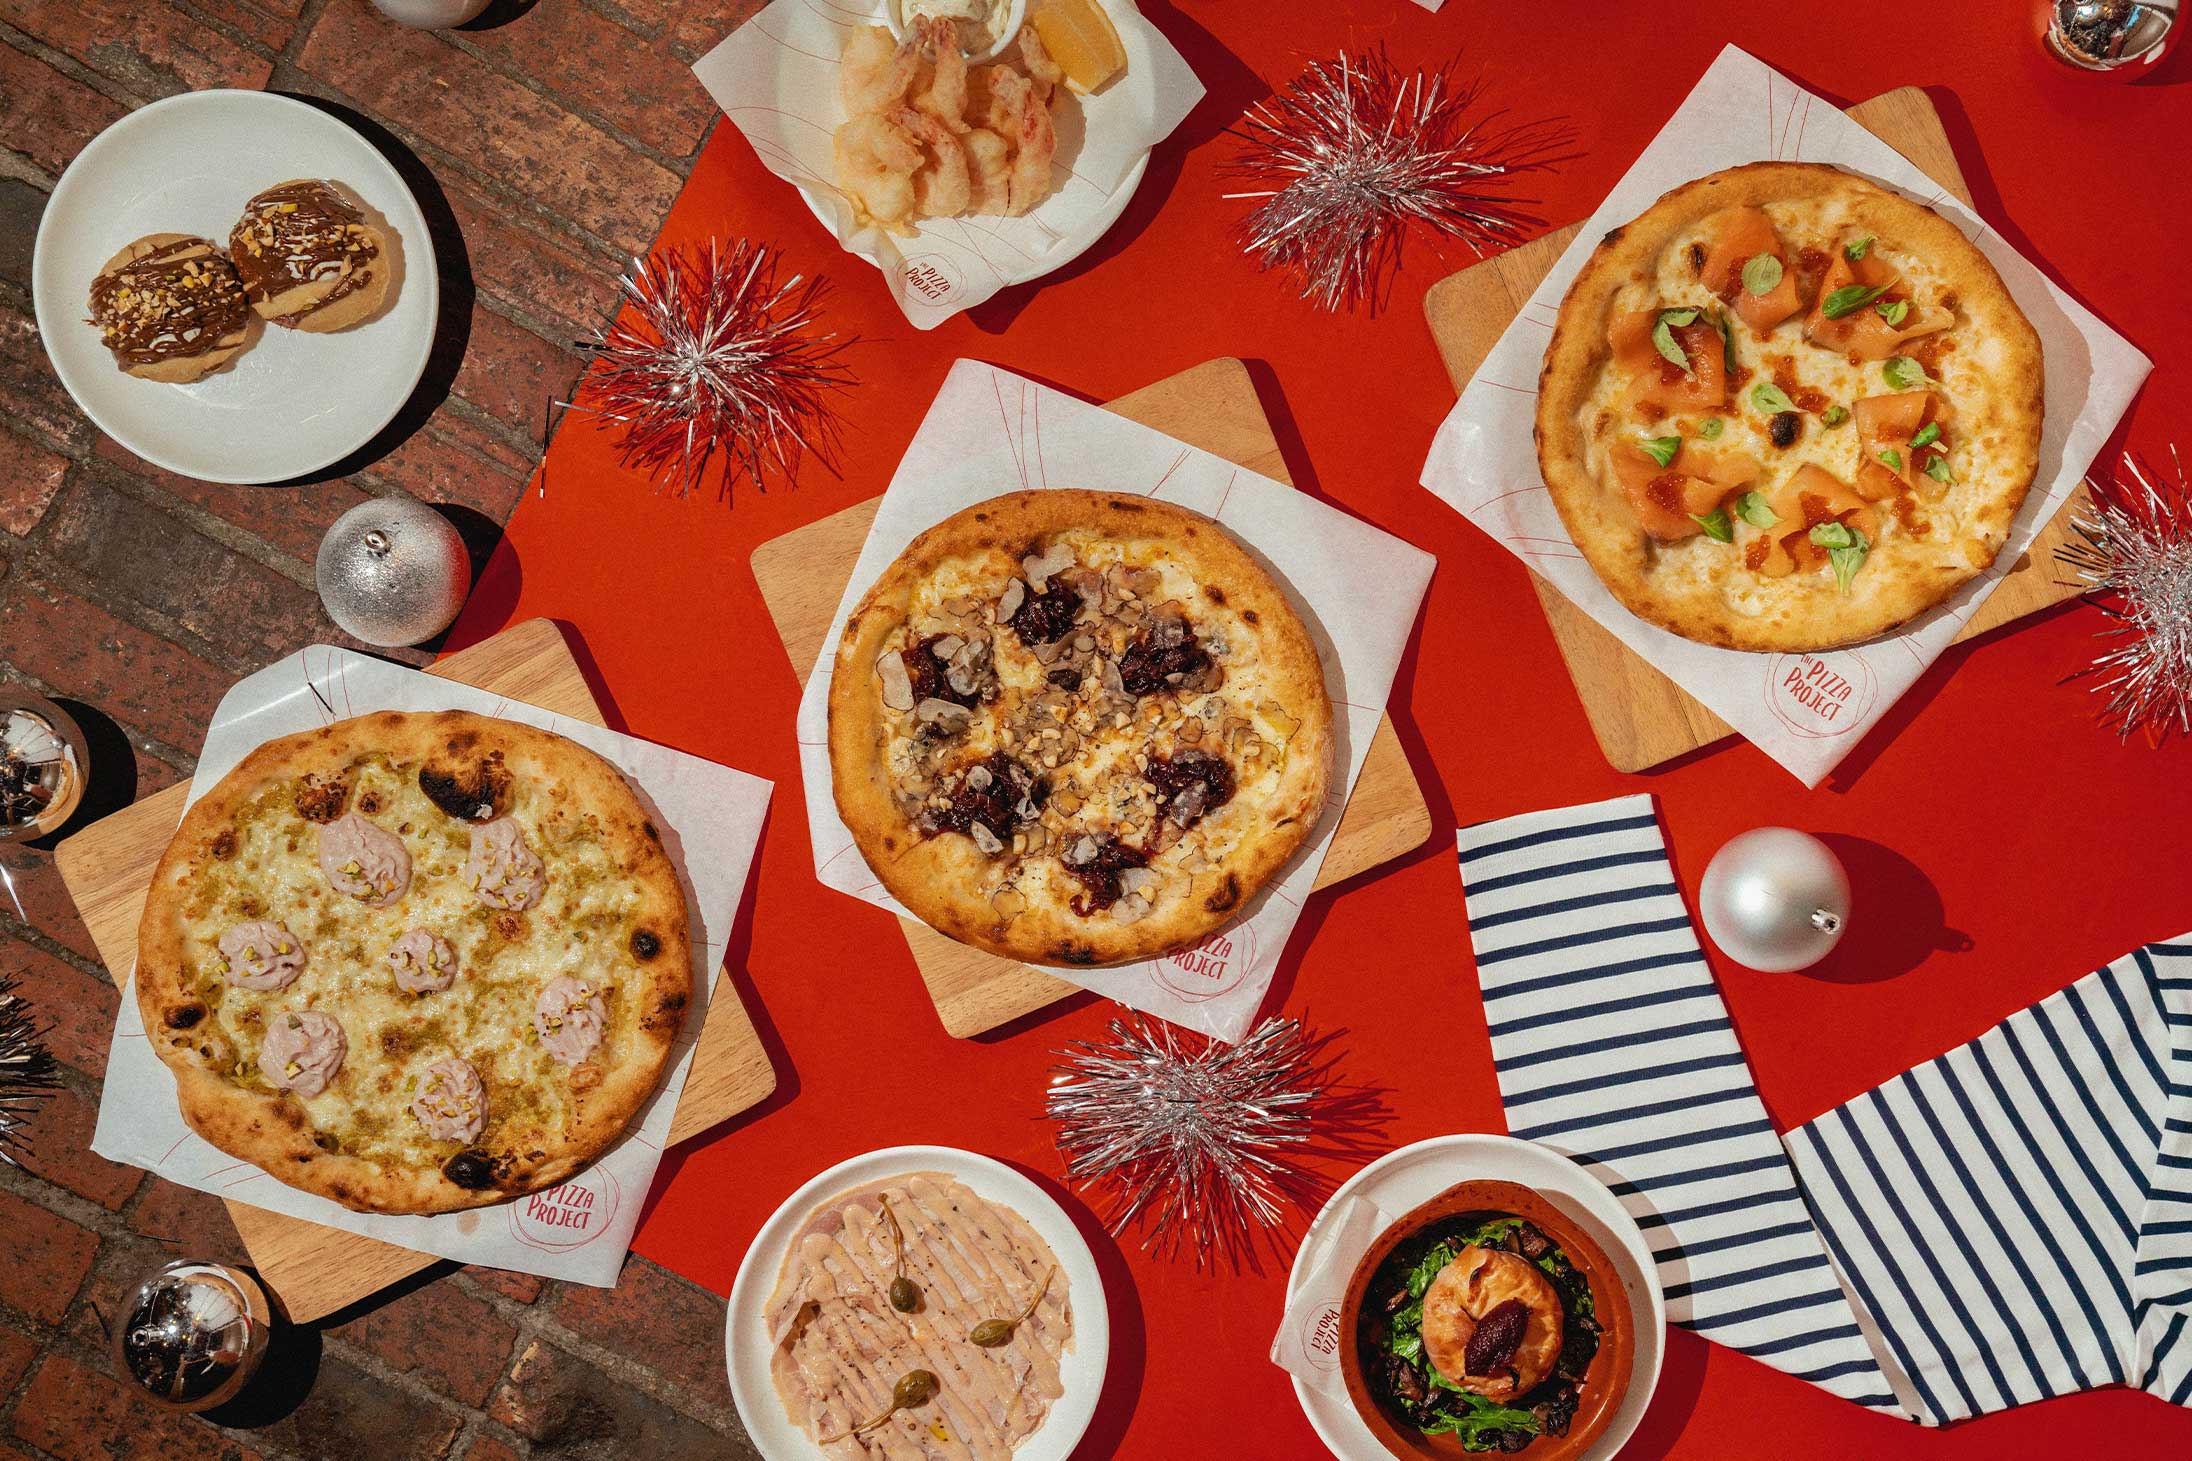 A festive meal at The Pizza Project in Starstreet Precinct